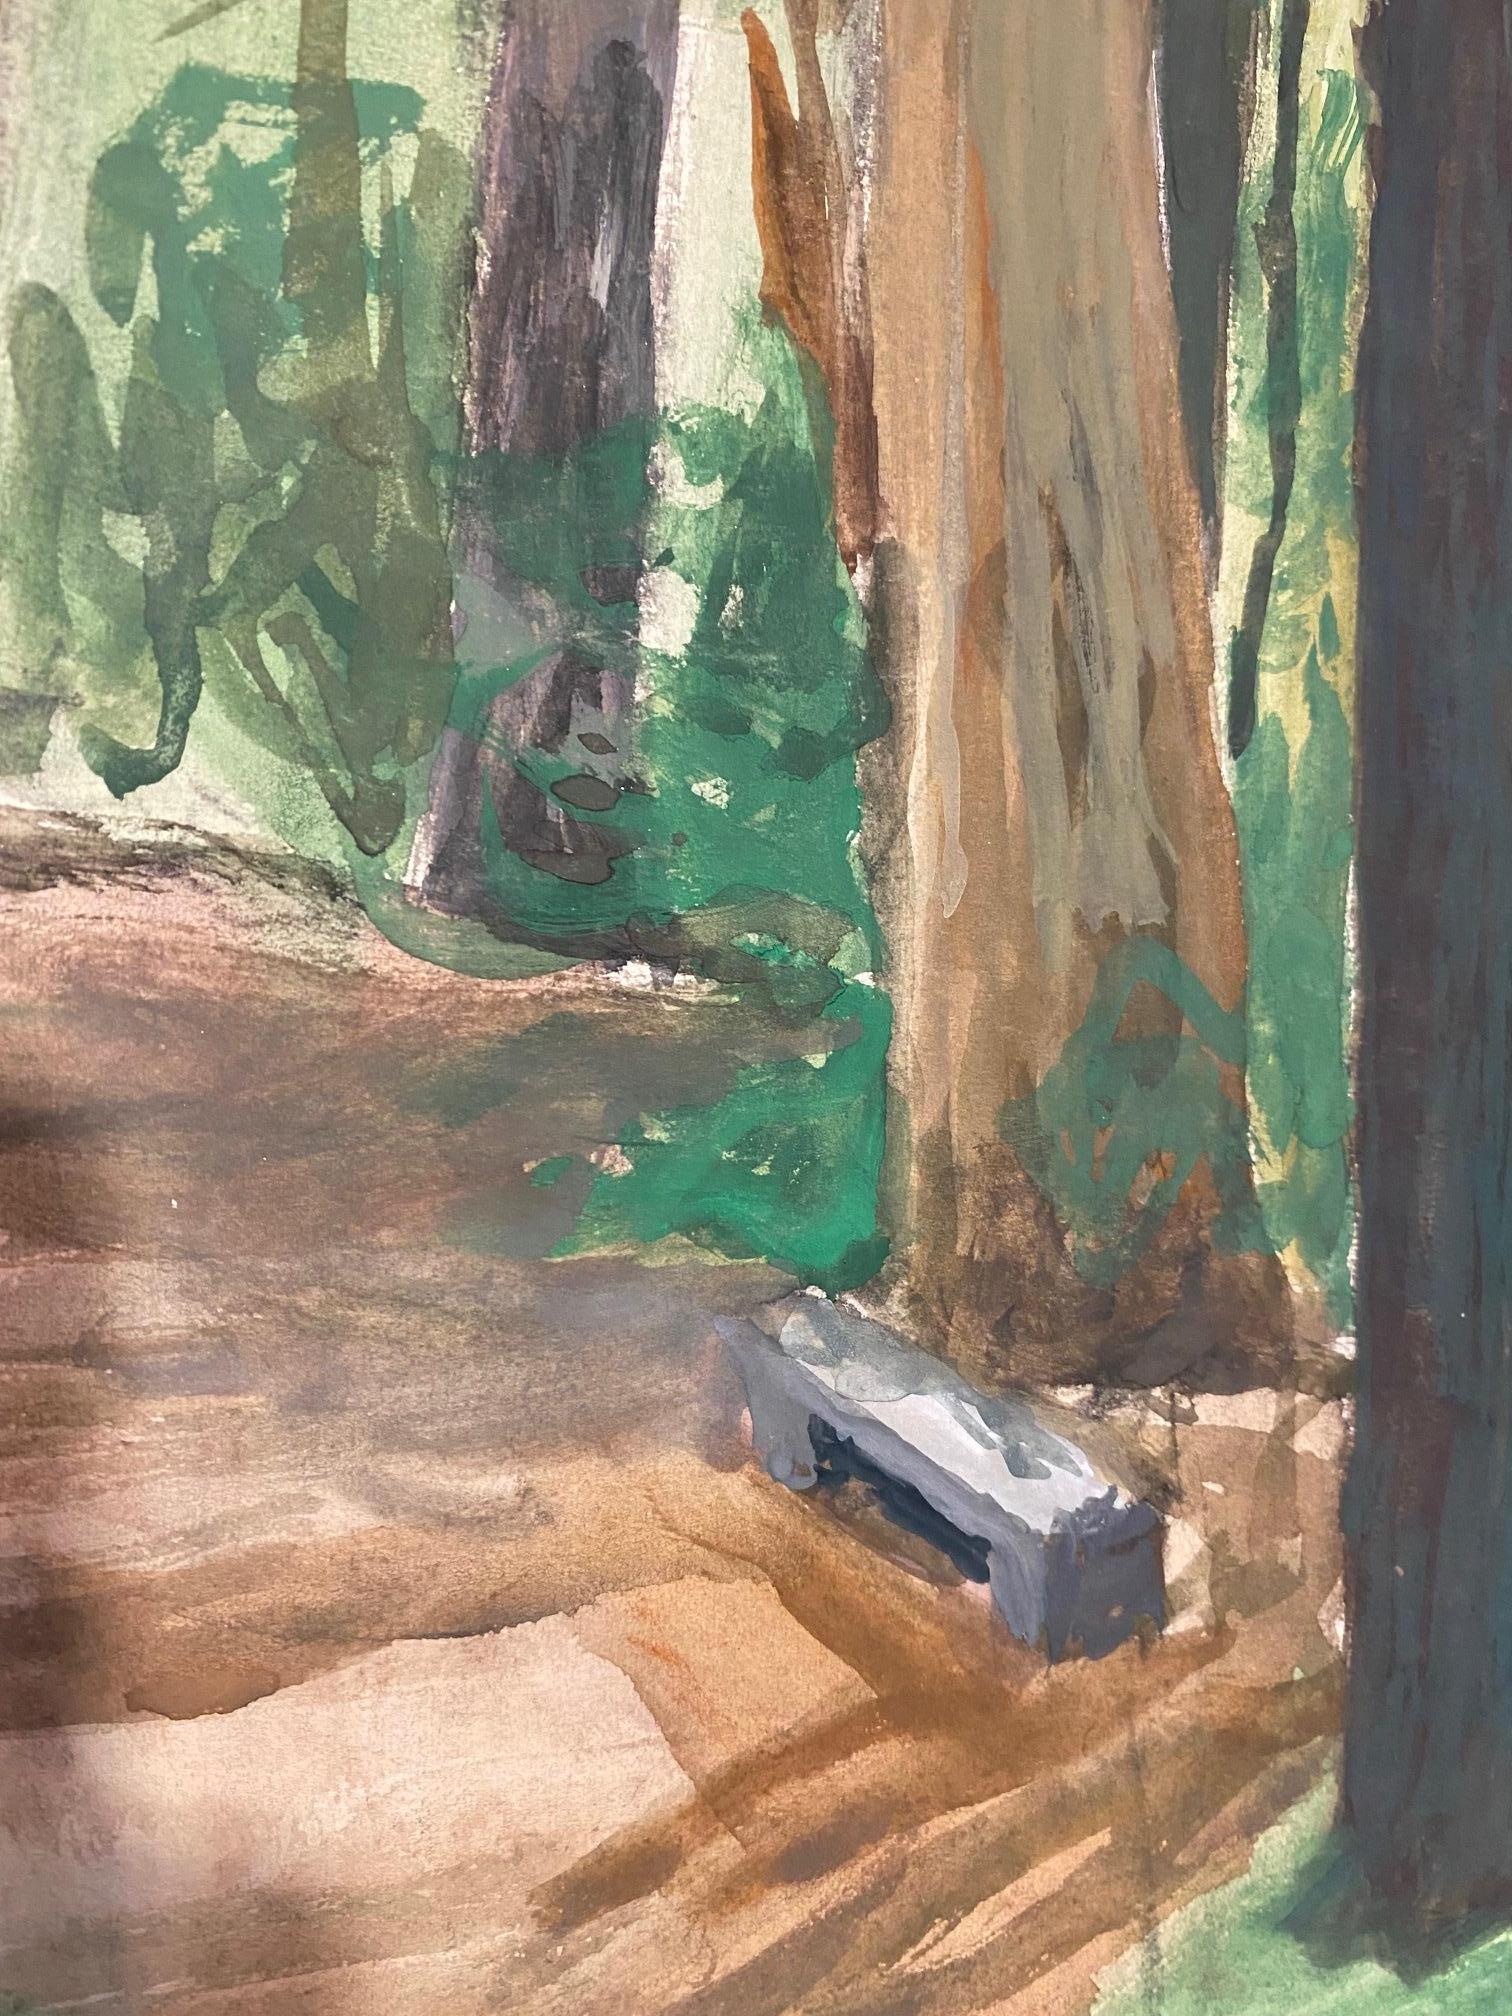 Stone bench under the woods by Charles Goetz - Watercolor 42x30 cm - Gray Landscape Art by Isaac Charles Goetz